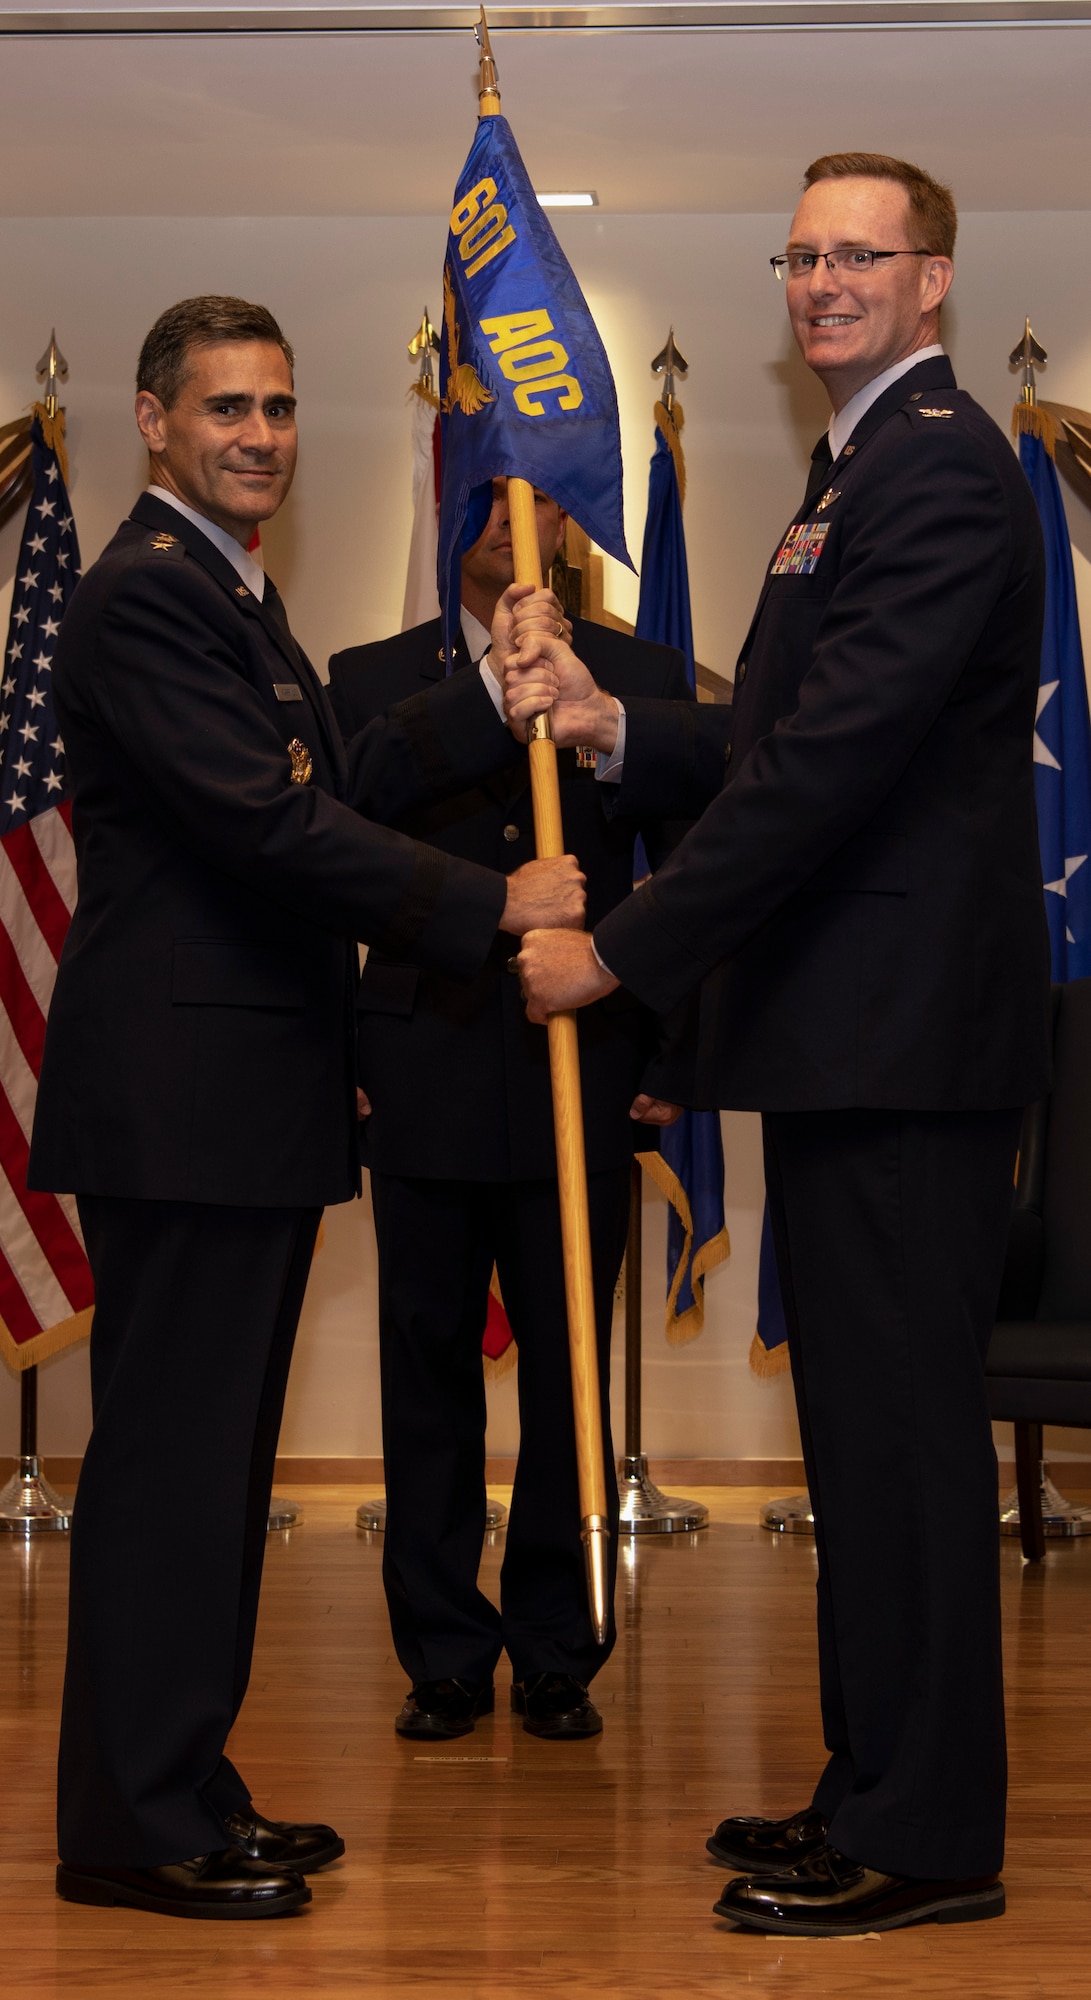 Col. Greg Krane, 101st Air and Space Operations Group commander, takes the ceremonial flag from Lt. Gen. Marc Sasseville, Continental U.S. North American Aerospace Defense Command Region - First Air Force (Air Forces Northern) commander, during the 601st Air Operations Center change of command ceremony at Tyndall Air Force Base, Florida on Sept. 26, 2019. The passing of the flag symbolizes Krane's acceptance of command of the 601st AOC. (U.S. Air Force photo by Senior Airman Cheyenne Larkin)